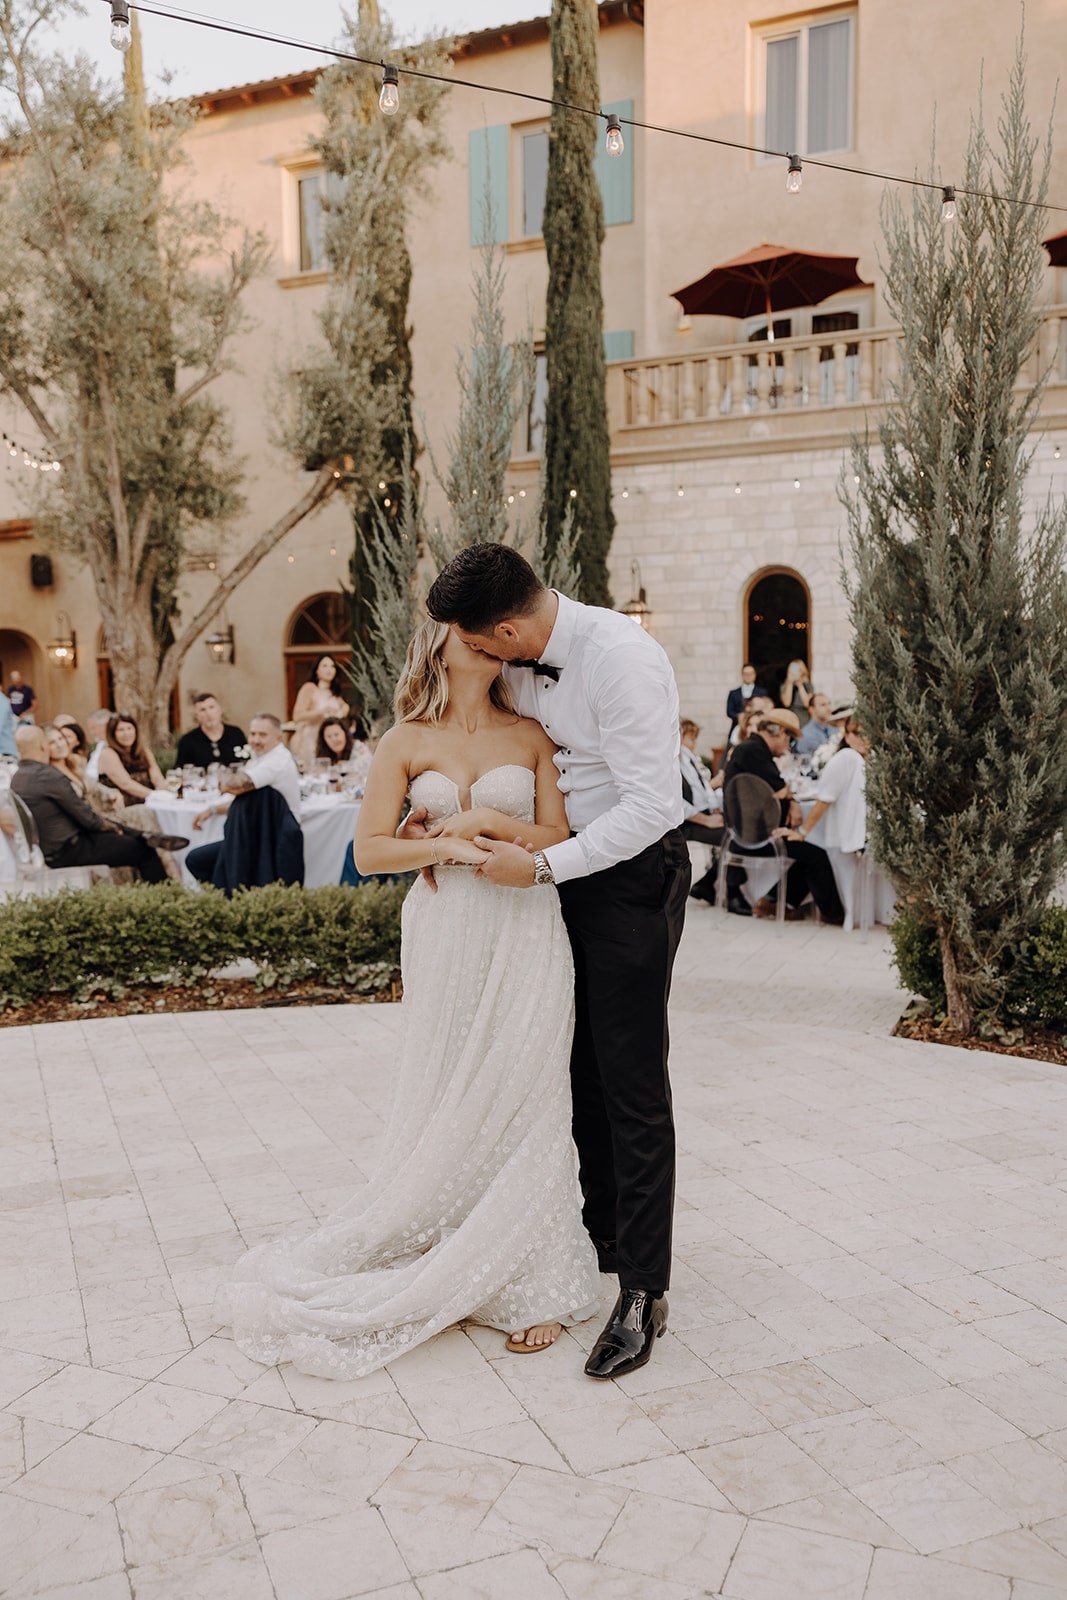 Bride and groom kiss after first dance at outdoor wedding reception